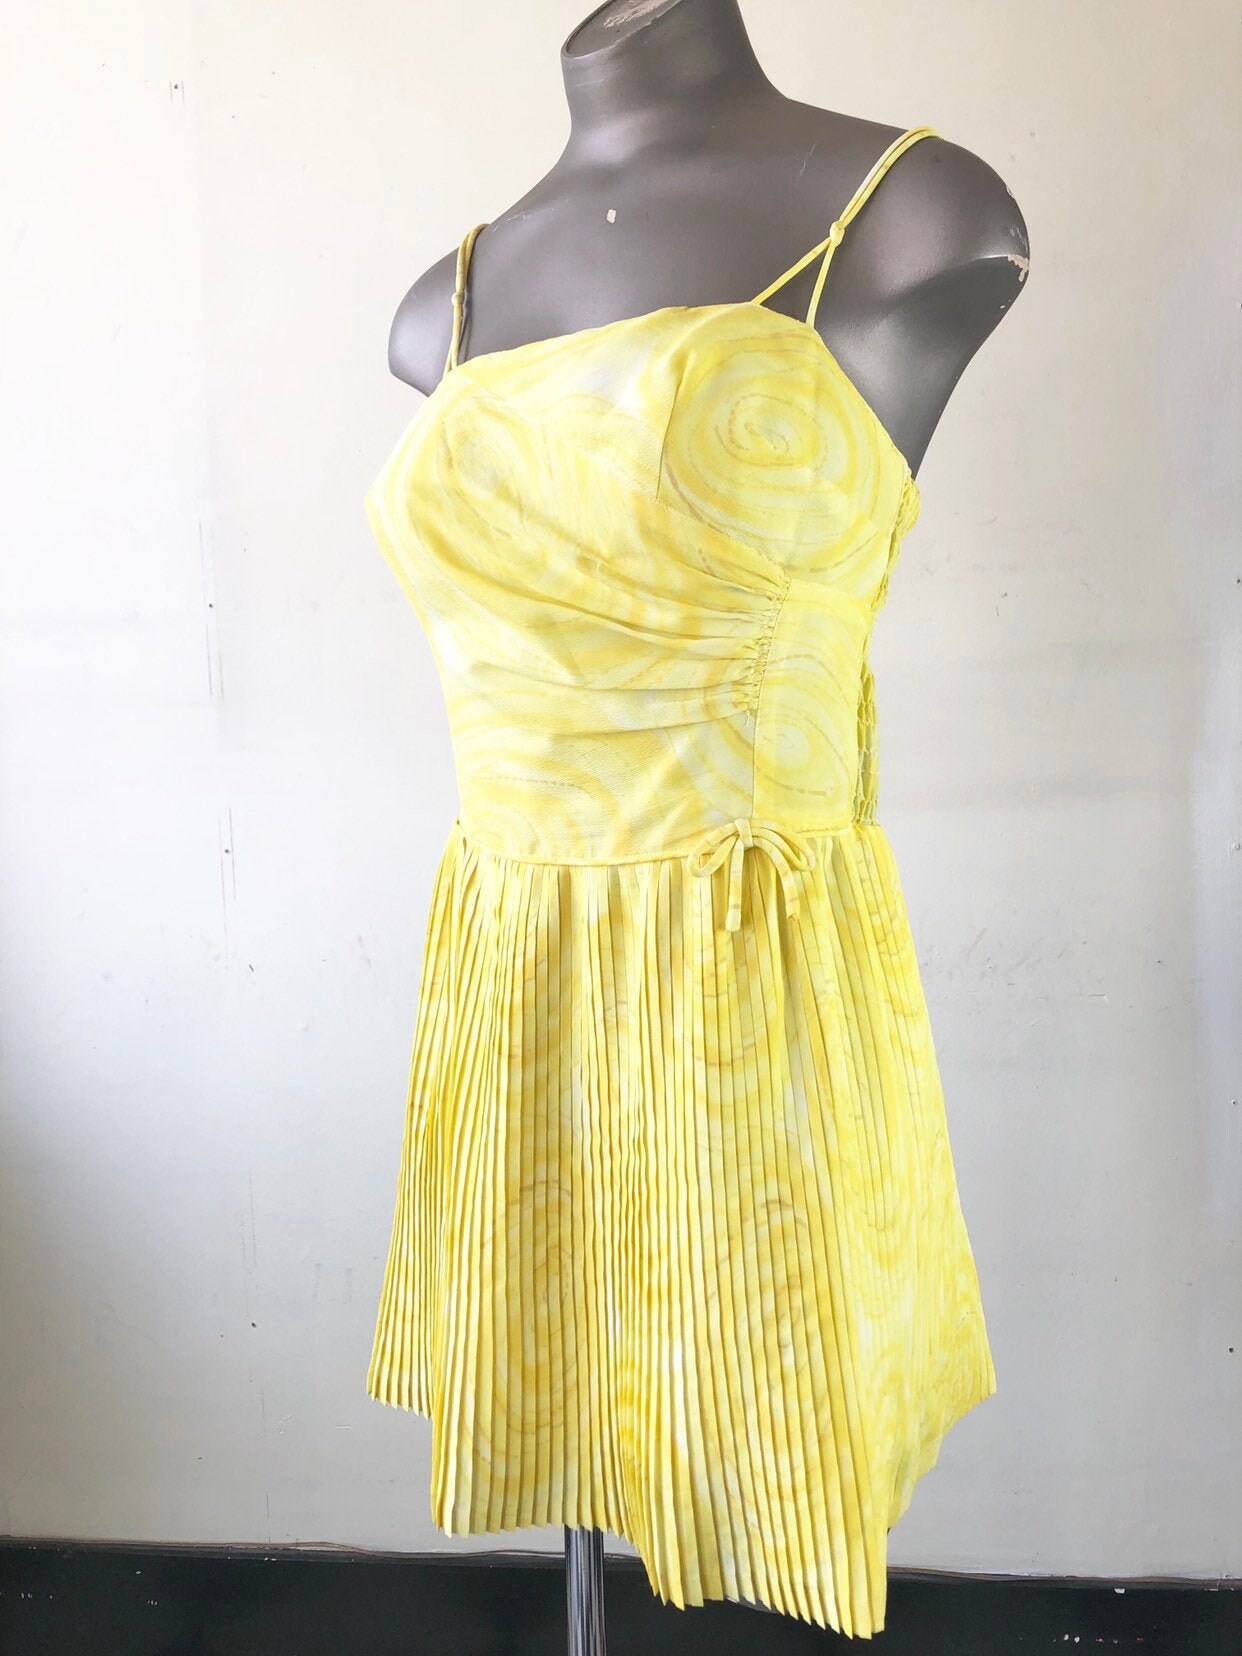 HOT 1960s Bright Yellow Playsuit S | Etsy